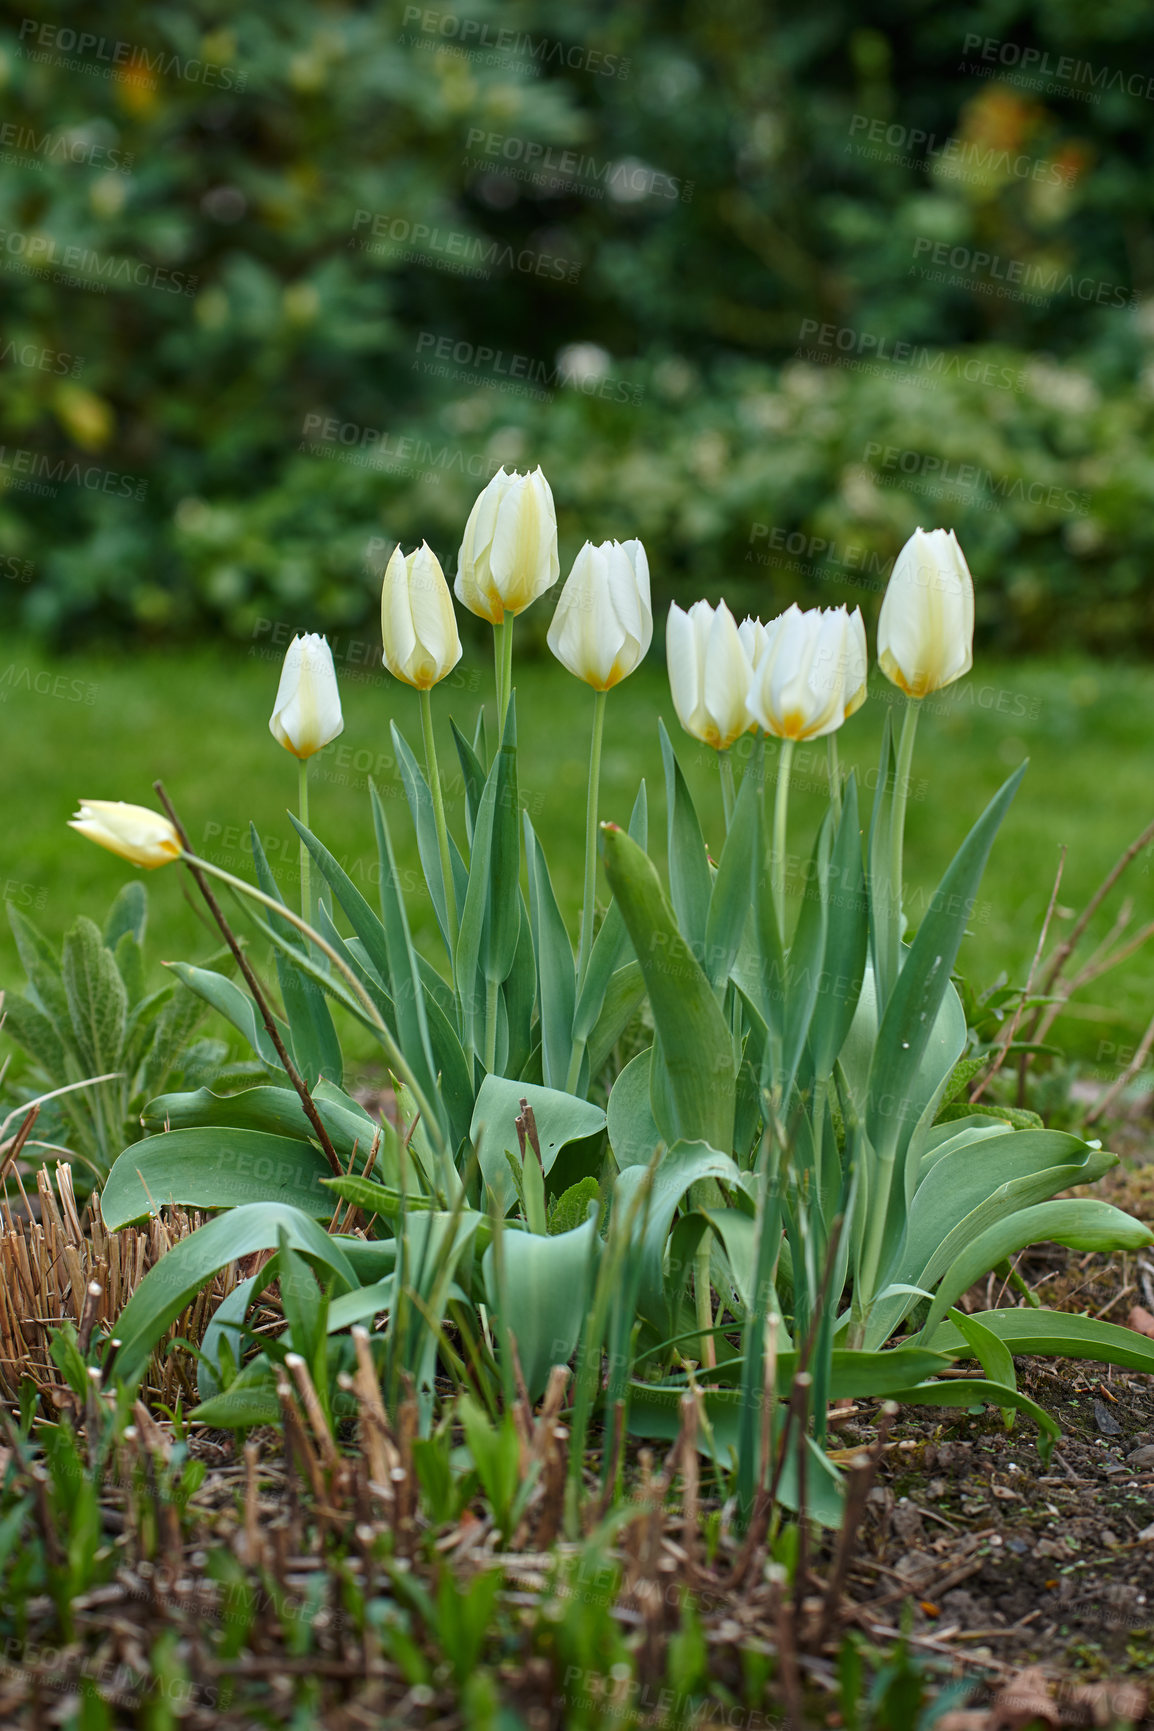 Buy stock photo White tulip buds in a garden. Beautiful bunch of tulips growing in dark soil in a backyard. Spring perennial flowering plants grown as decoration in parks and for outdoor landscaping
